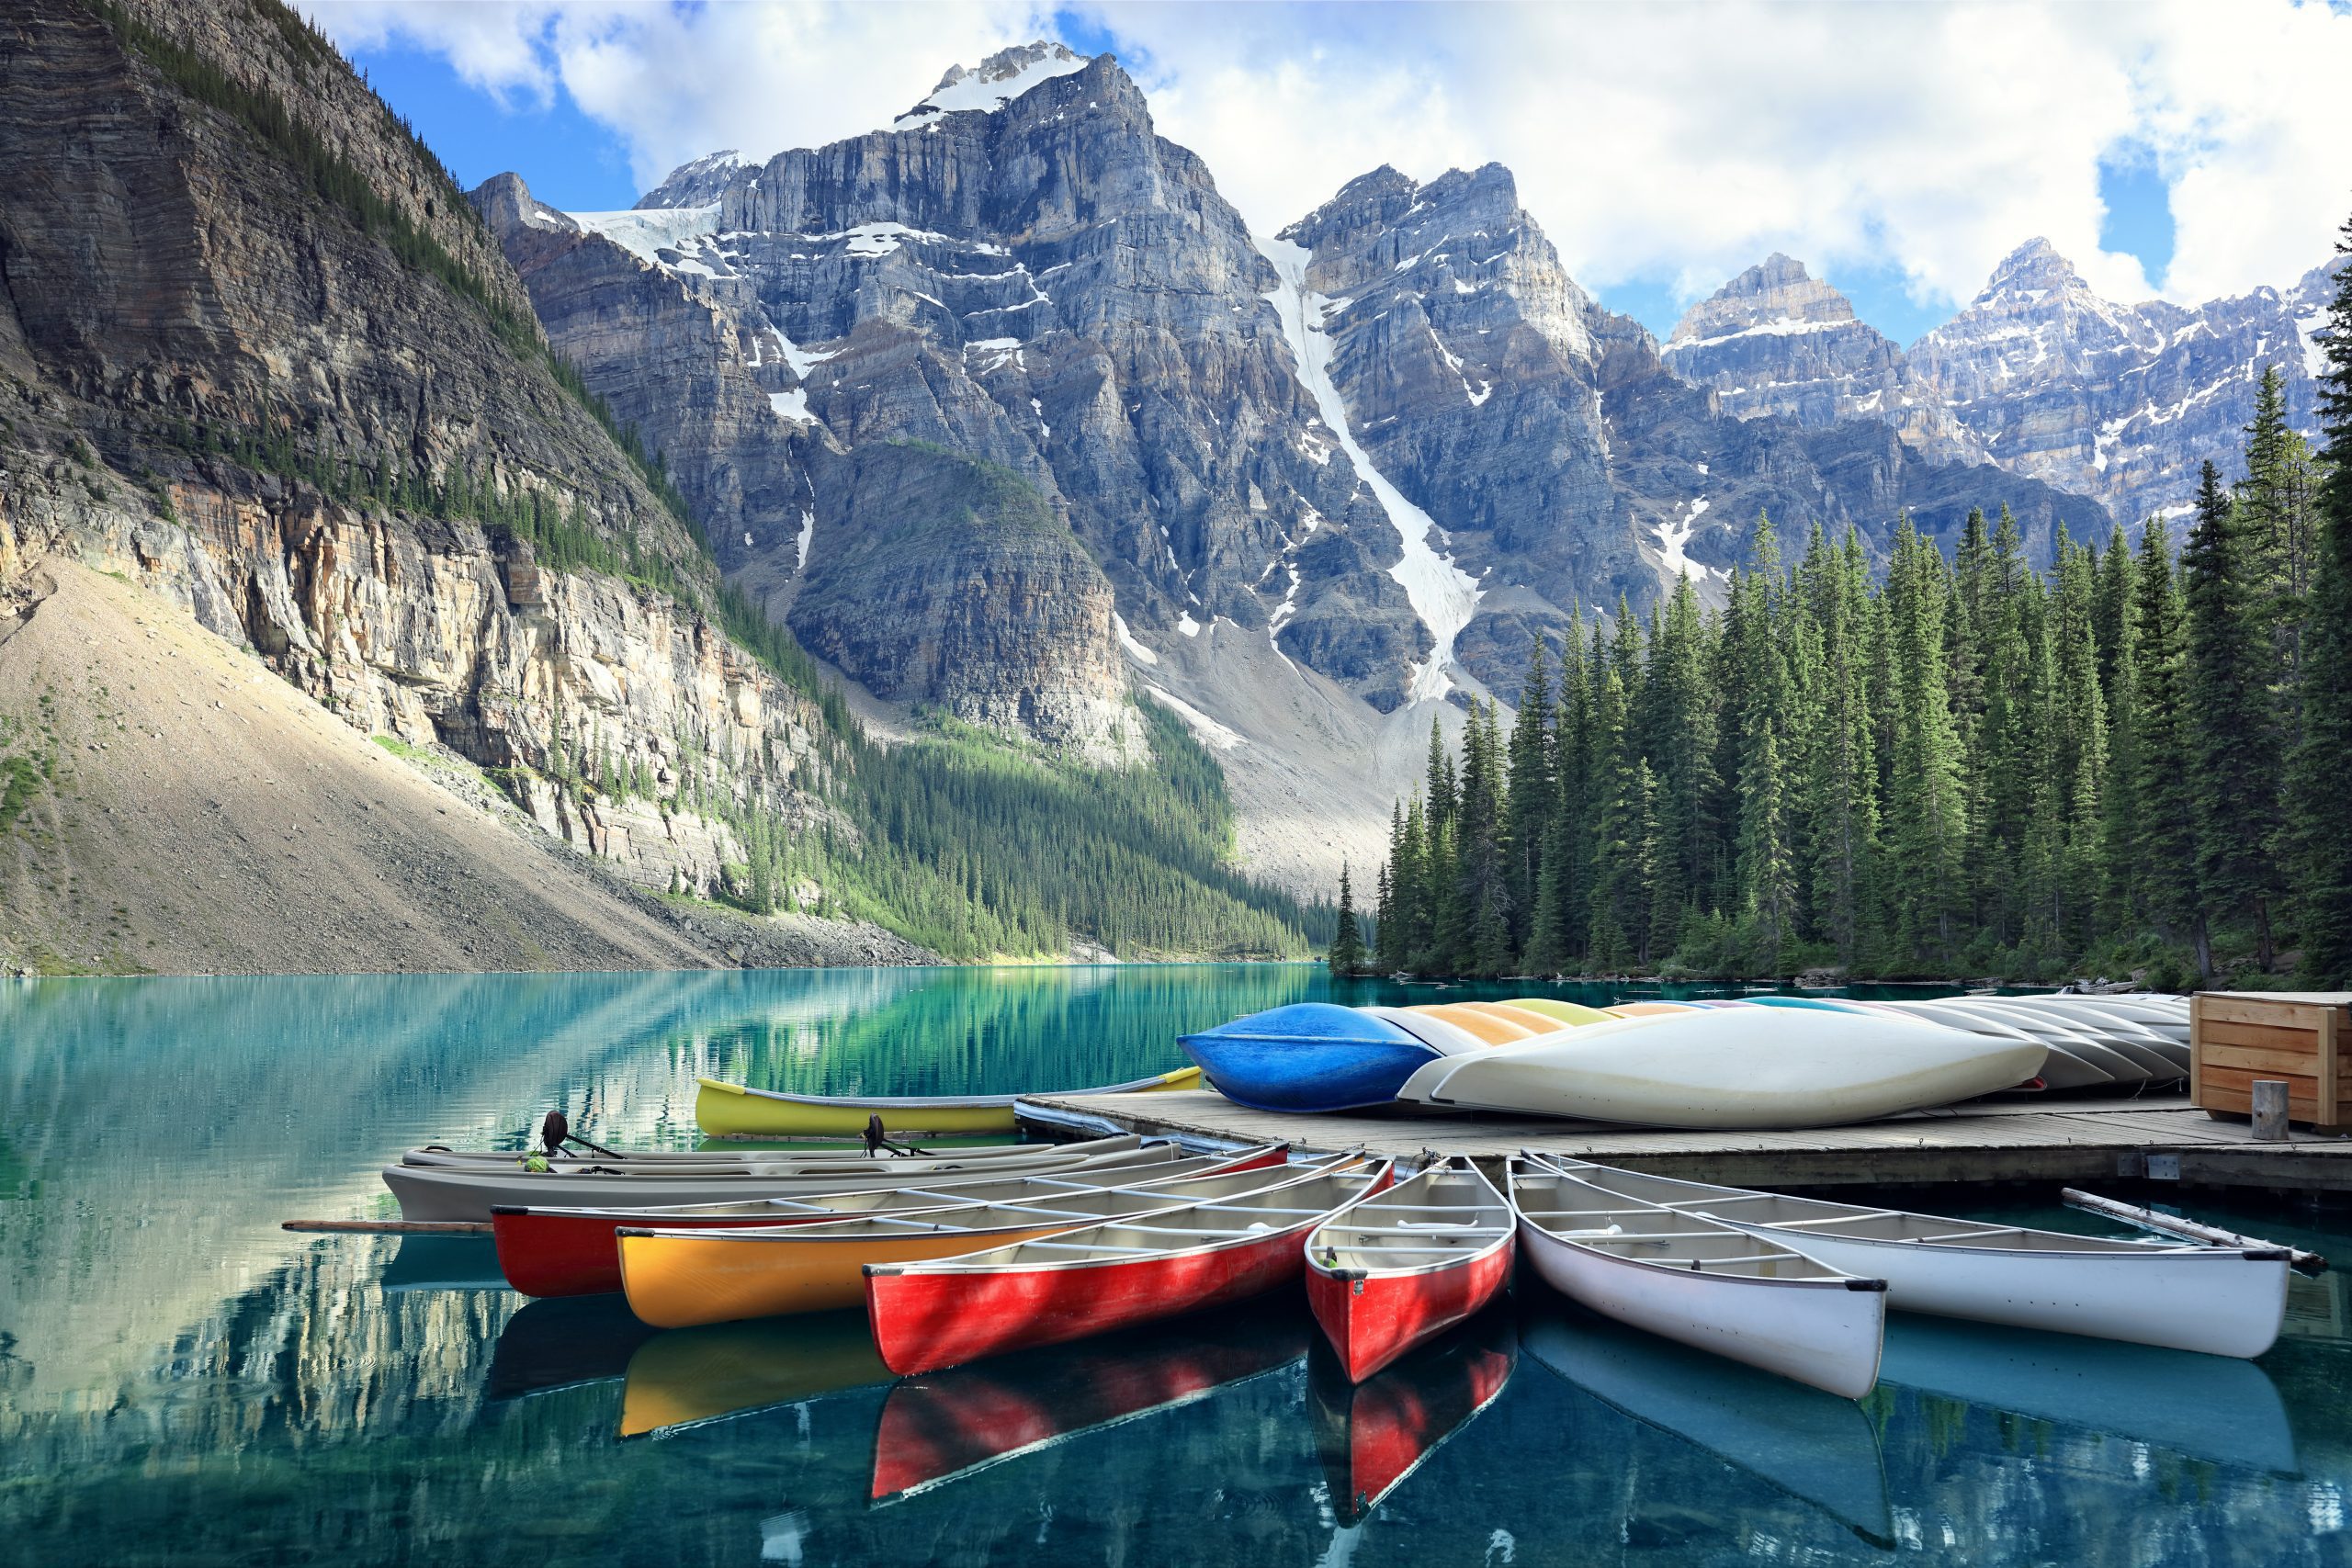 Seeking Adventure and Connection? The Majestic Canadian Rockies Beckons!